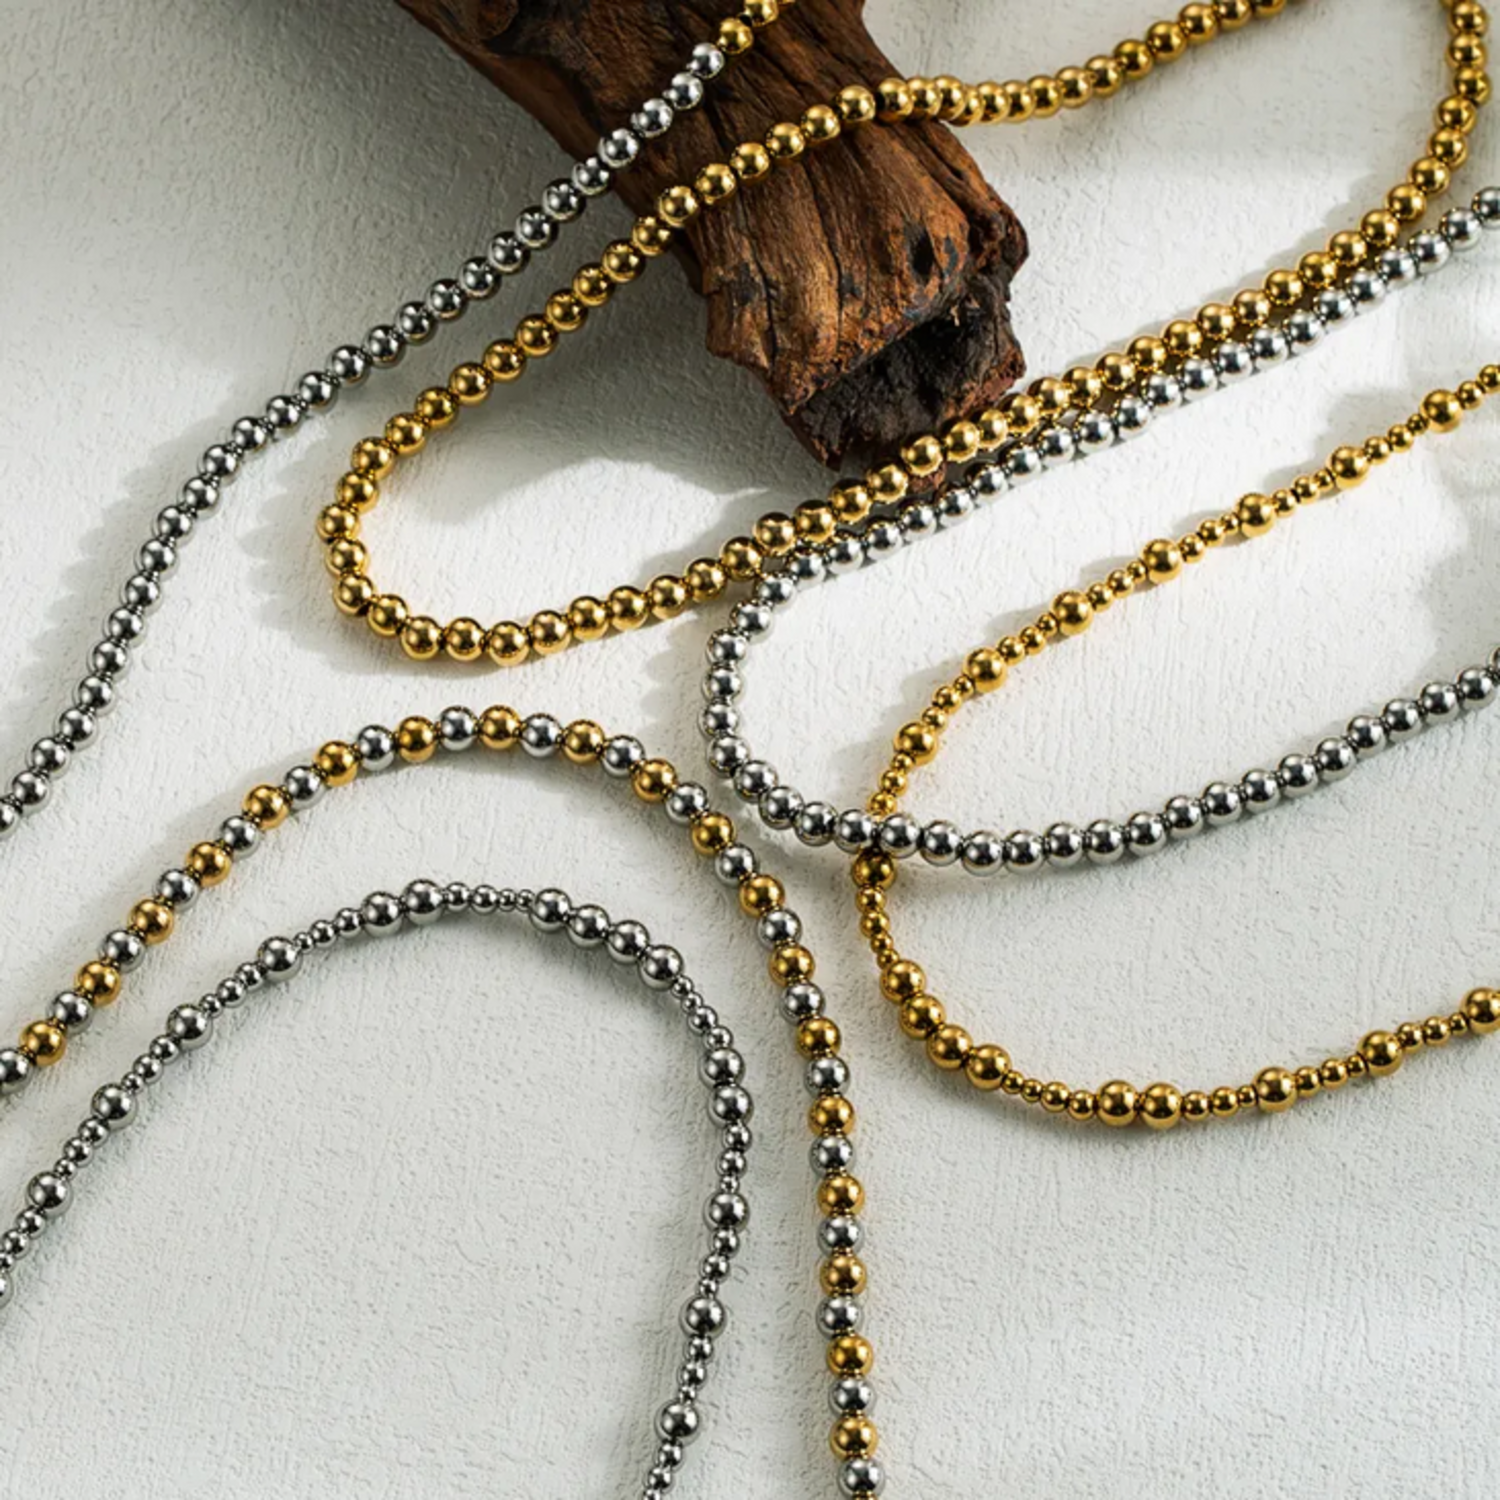 Men&Women's Real 18K Gold Filled 2mm wide Italian Round Bead Chain Necklace  X992 | eBay